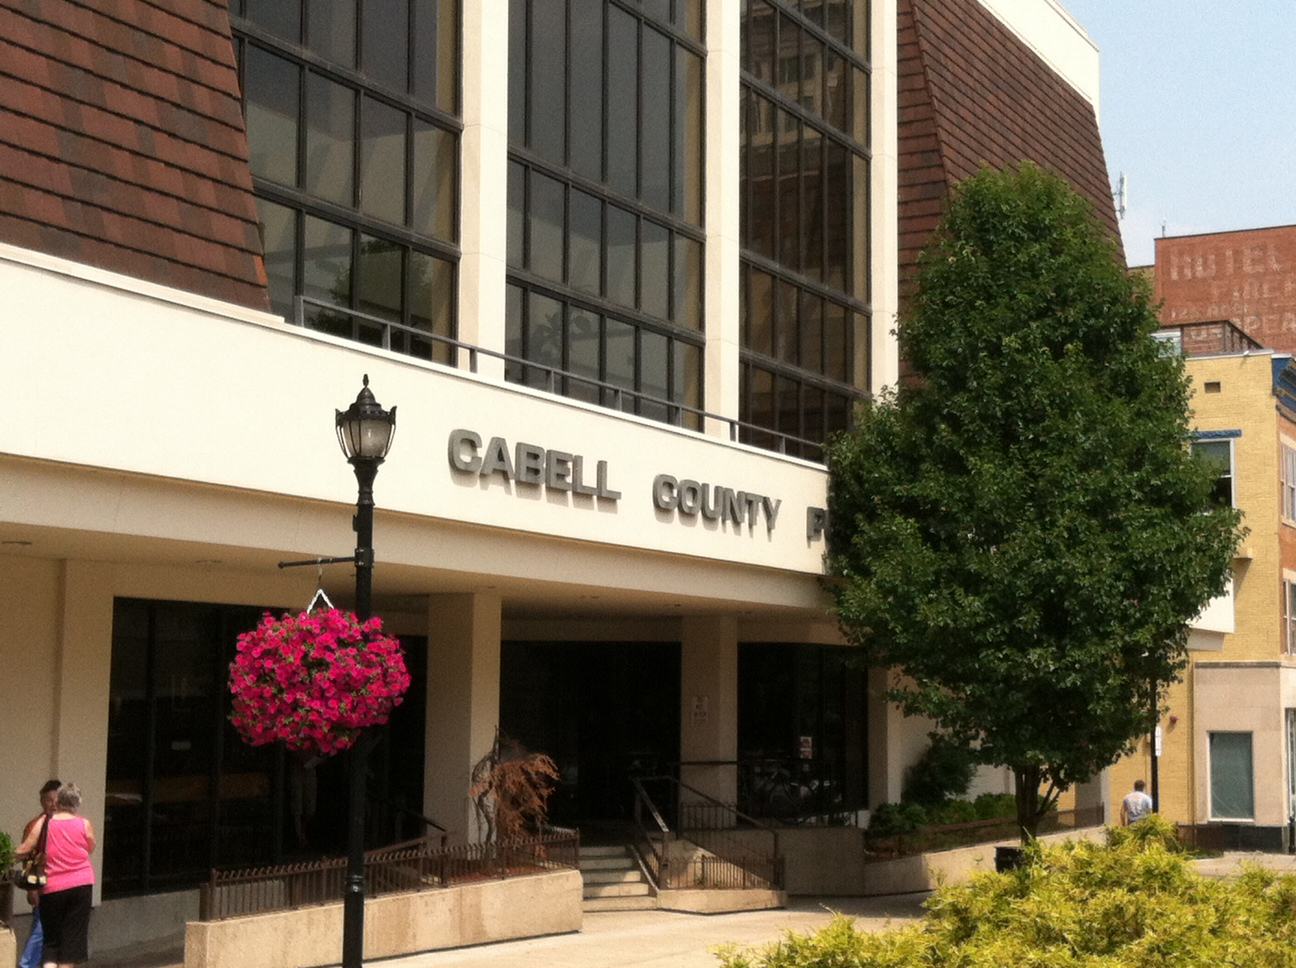 Cabell County Public Library